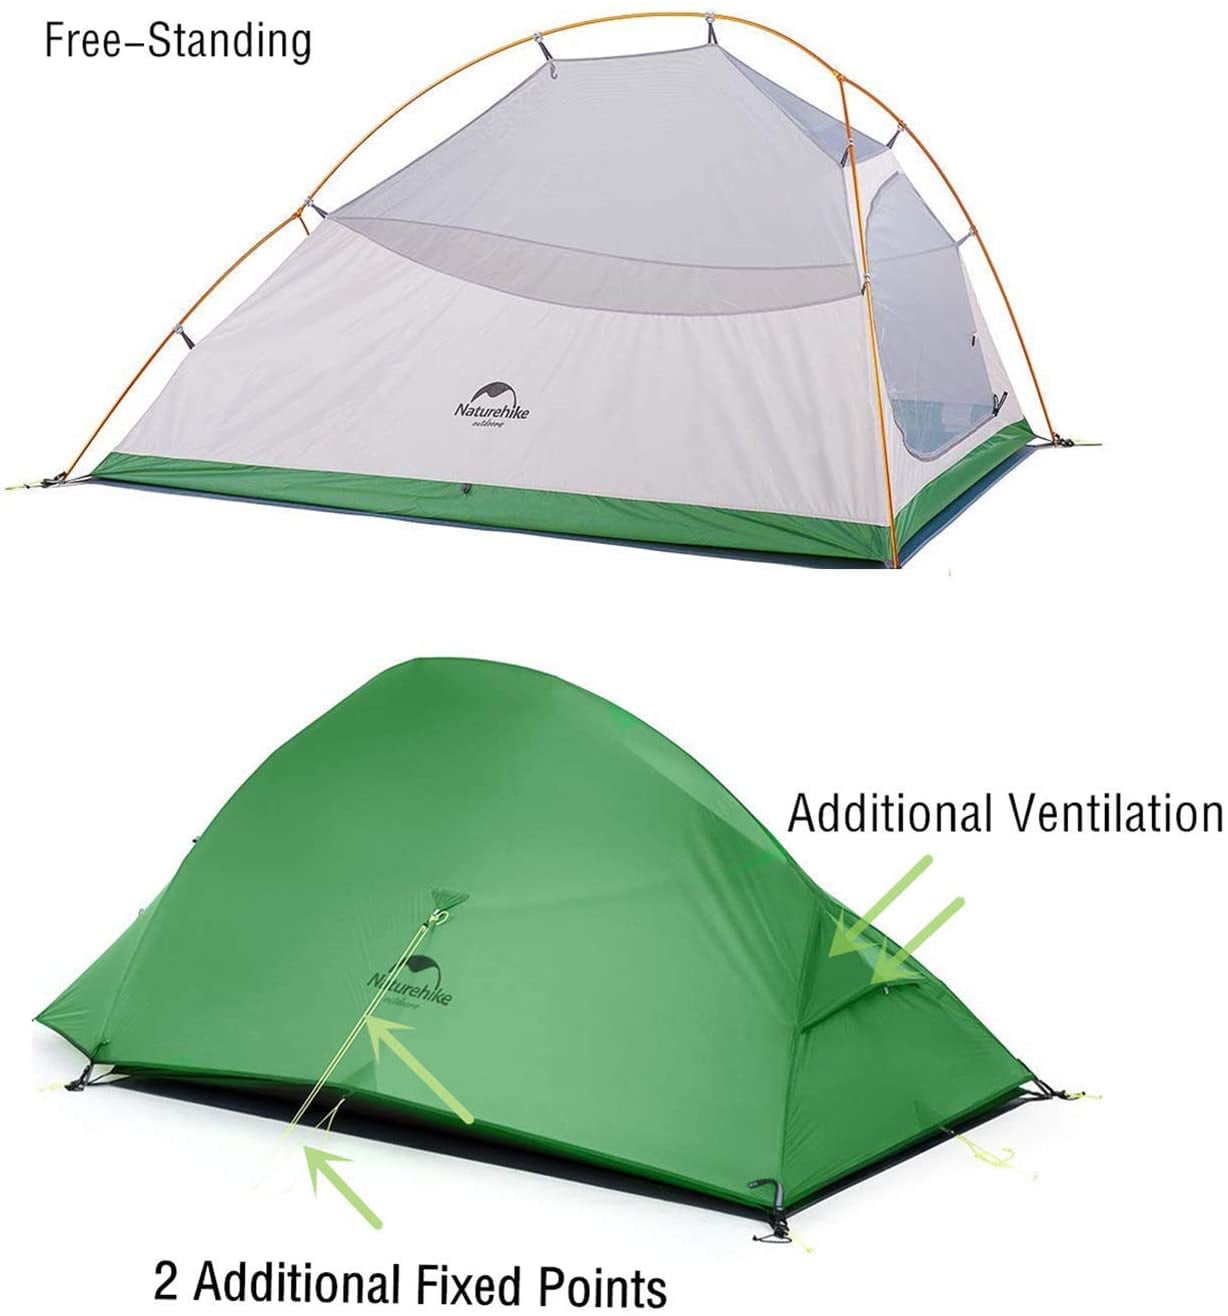 4 Season for Outdoor Camping,Backpacking,Hiking,Mountaineering Travel Naturehike Cloud-Up 1 2 3 Person Lightweight Backpacking Waterproof Tent Easy Setup 